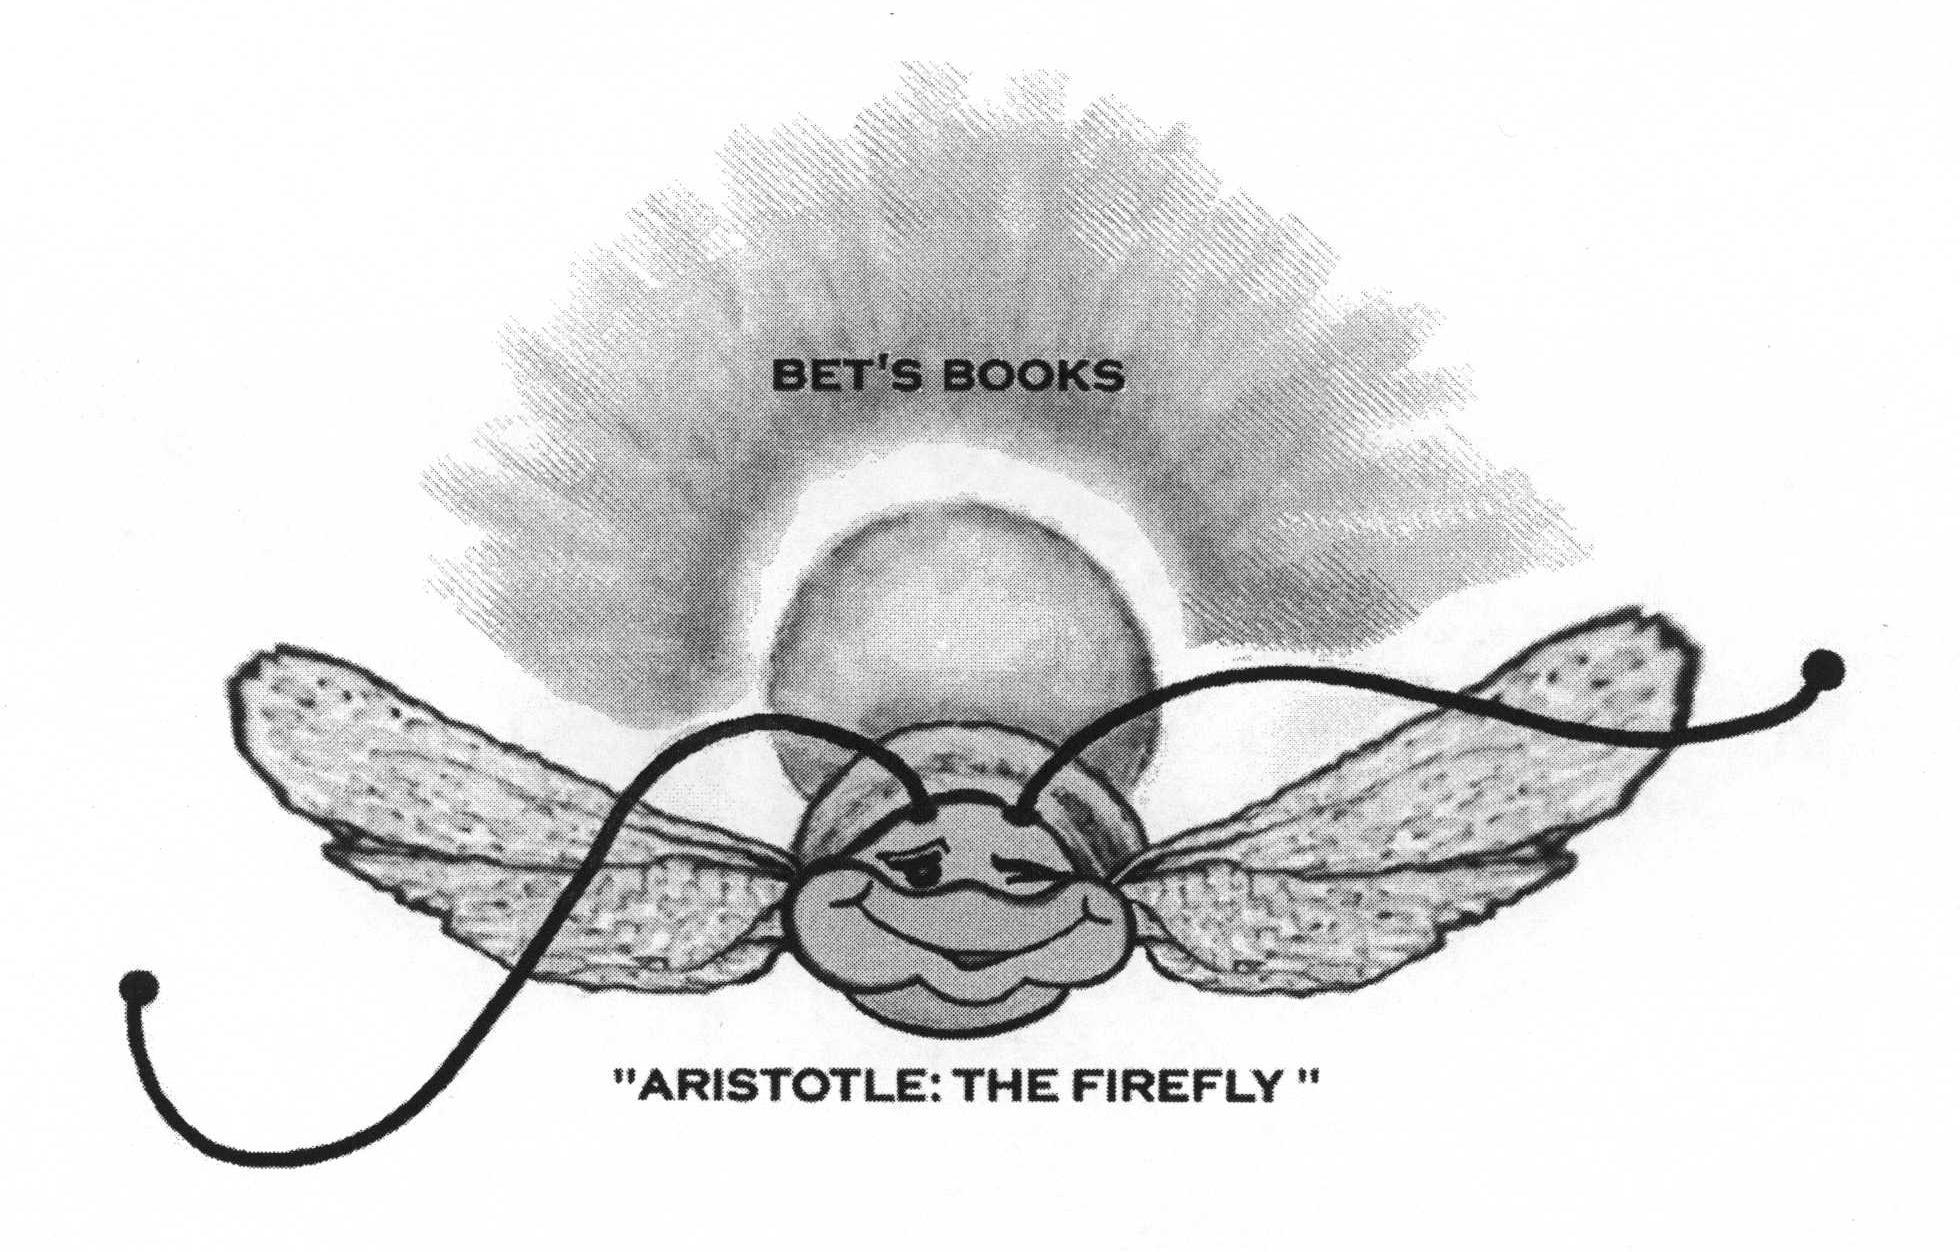  BET'S BOOKS &quot;ARISTOTLE: THE FIREFLY&quot;